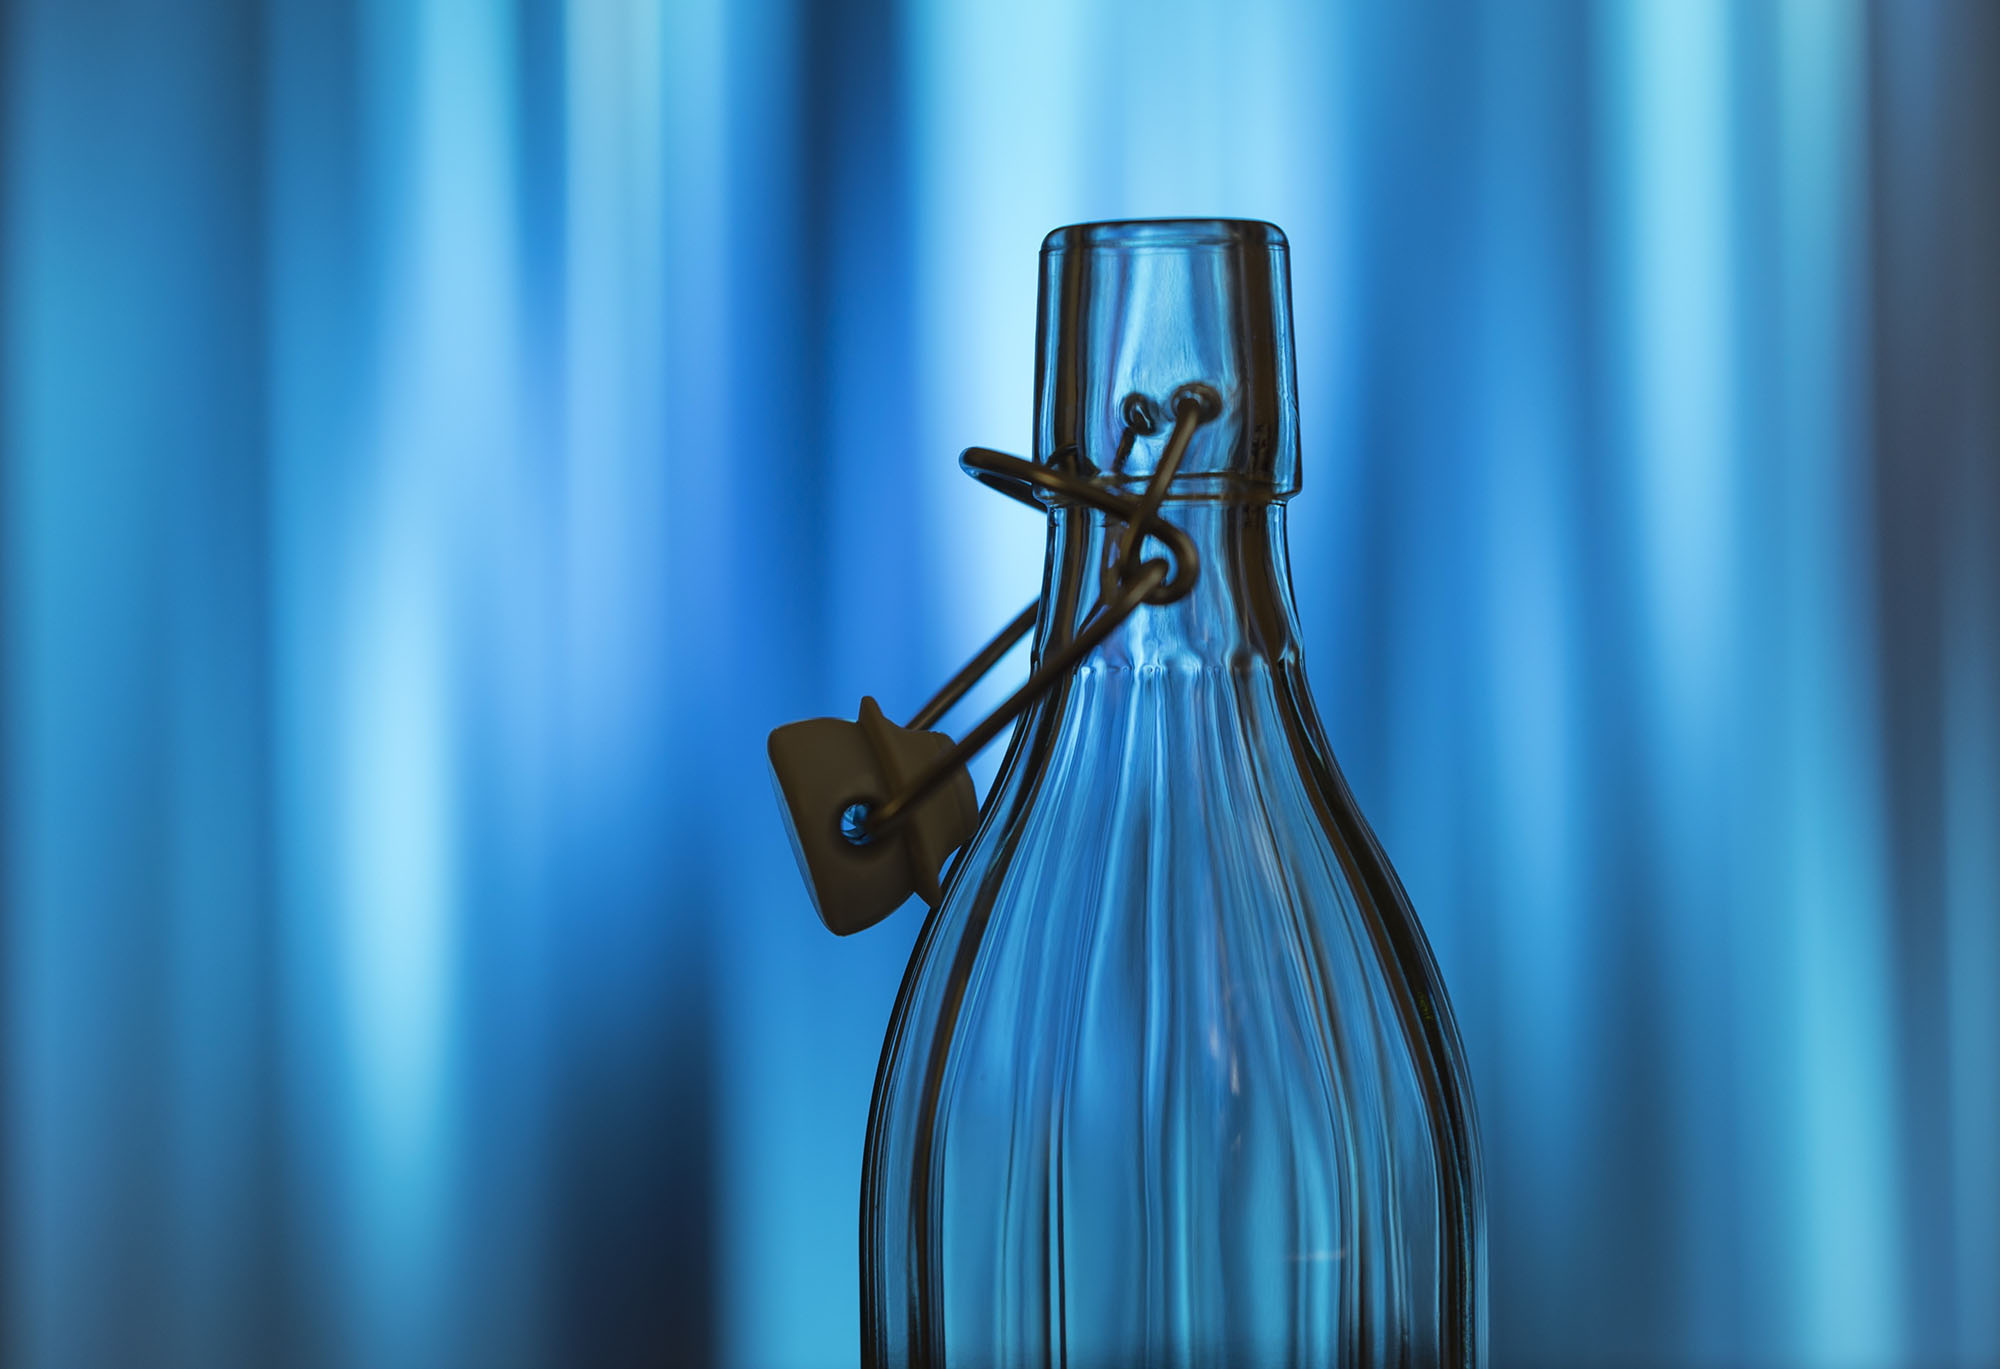 A silouette of a glass liquid caraff with stopper. The image was obtained from Unsplash at https://unsplash.com/photos/aZcv8wN30NI